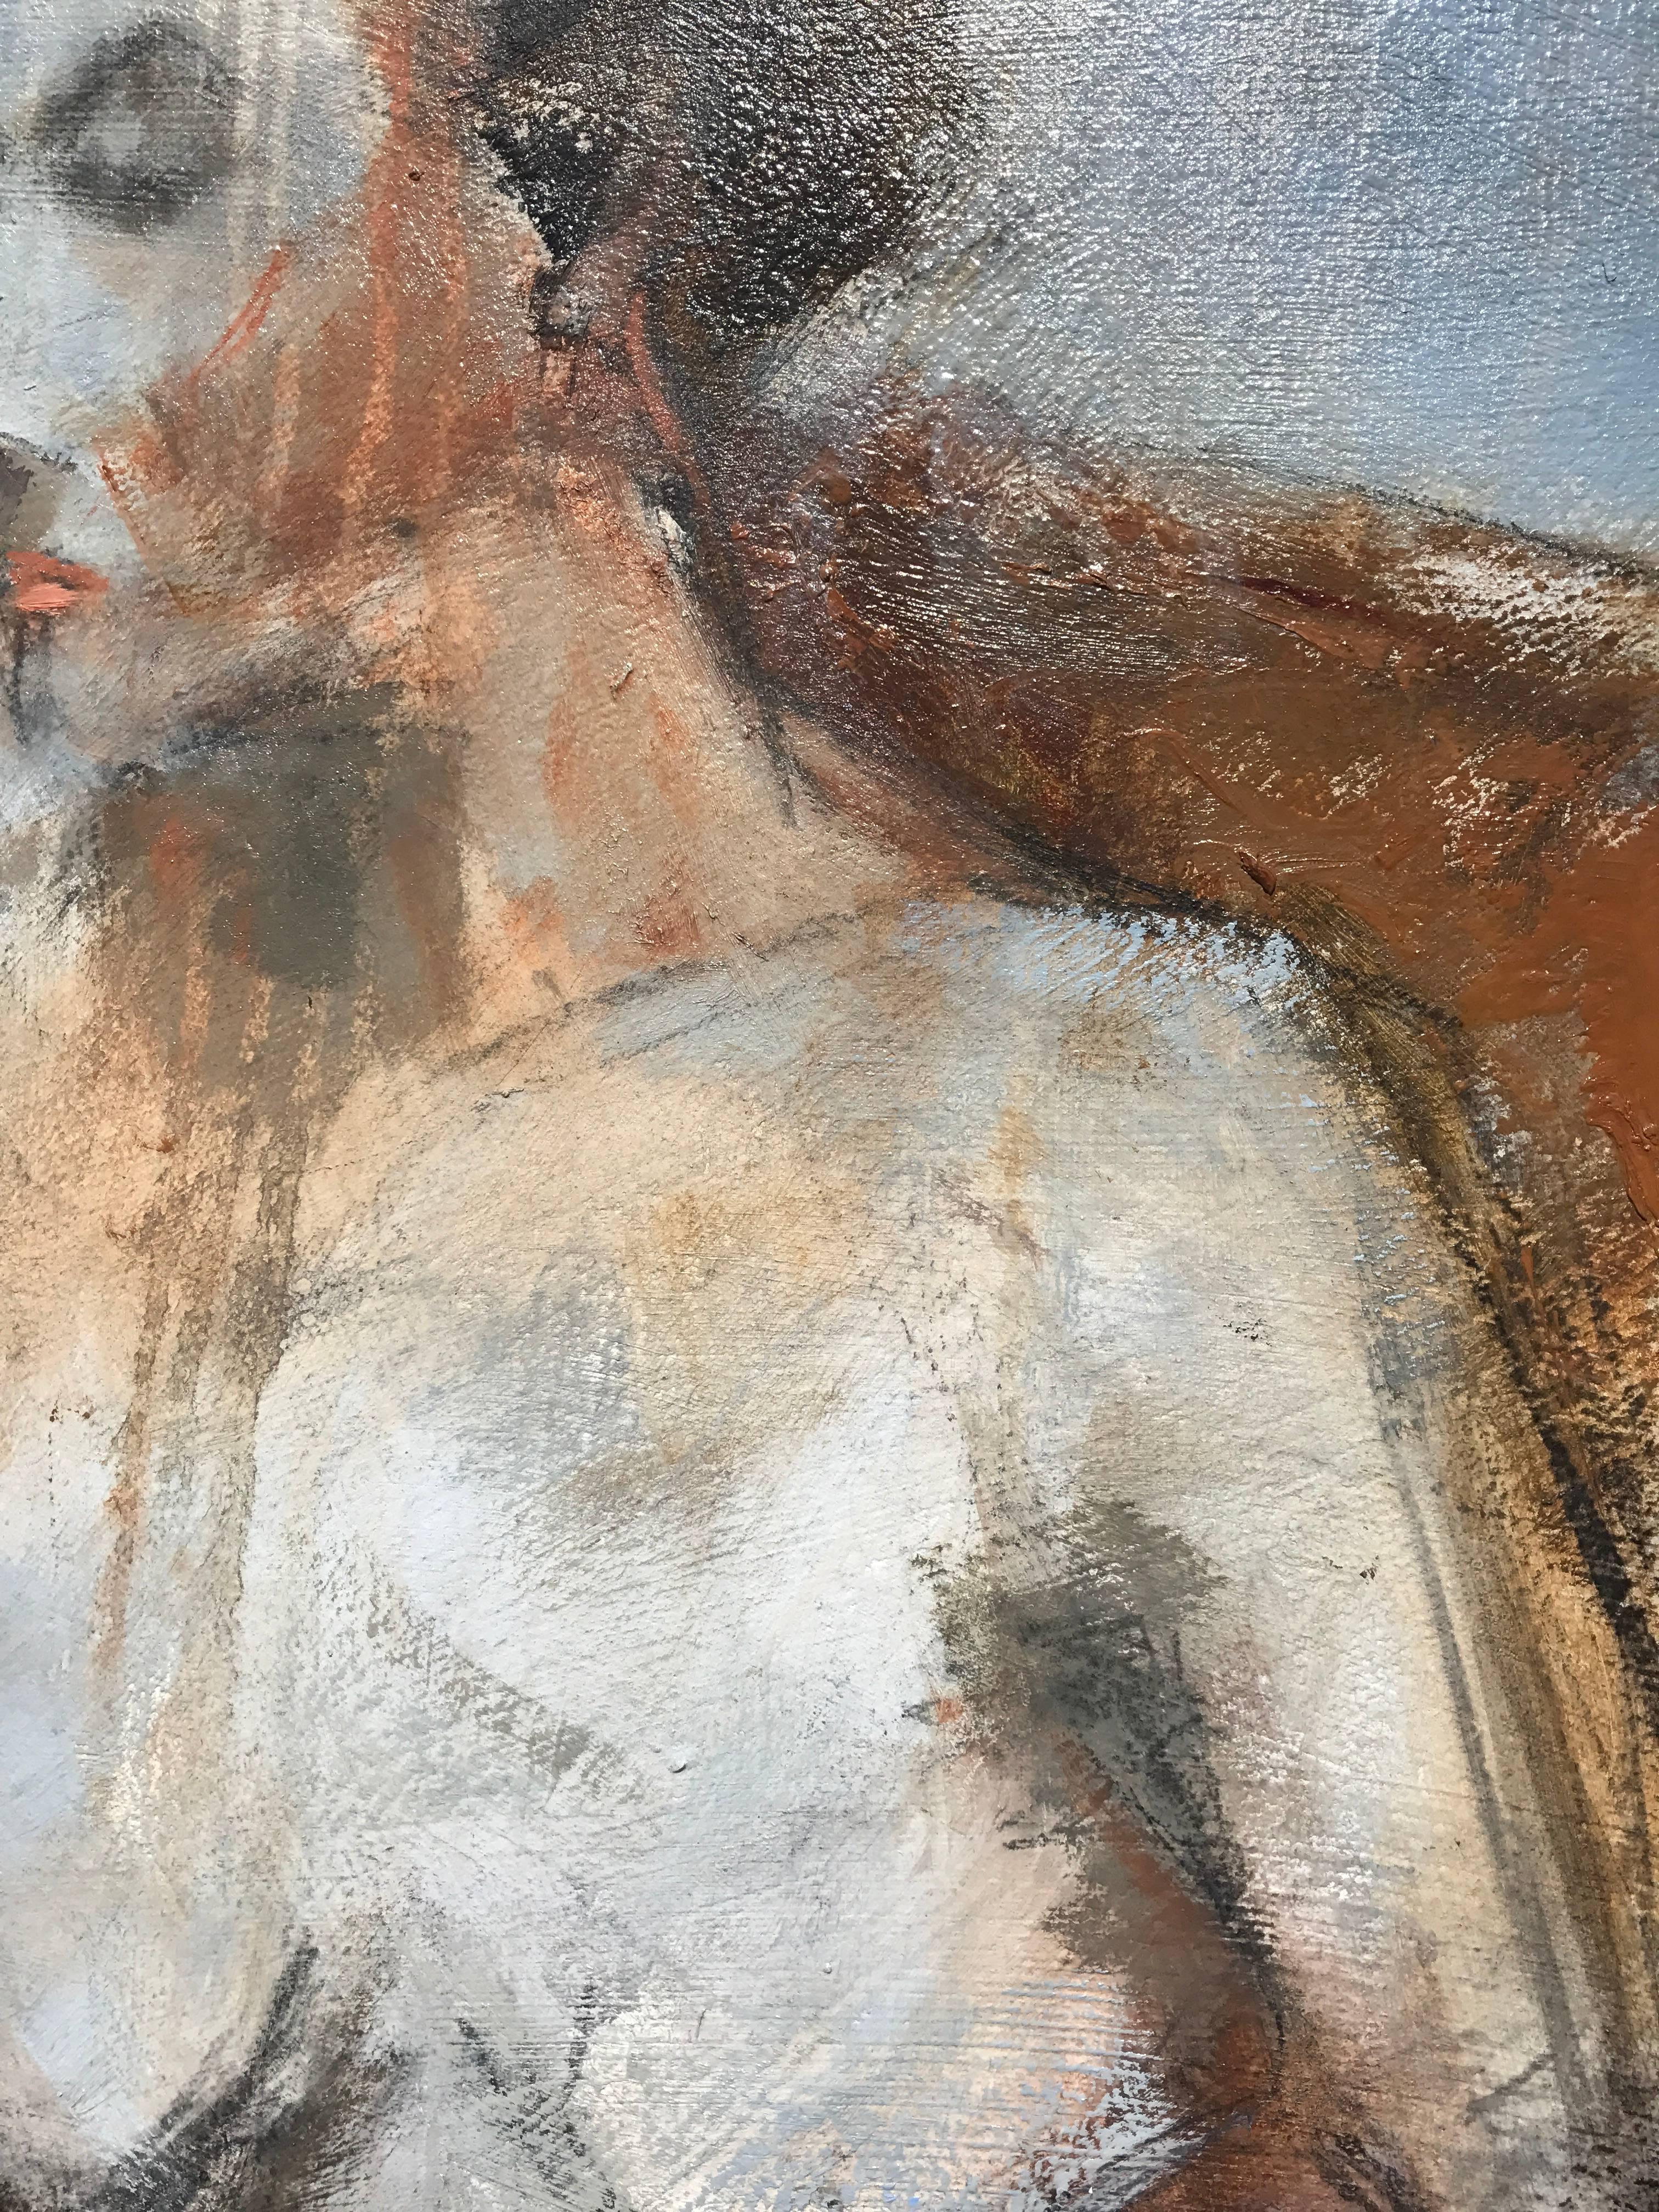  Sharon Hockfield's art is complex as is her subject - the nude.  People aren't always pretty.  They are more than skin deep.  They are more than a portrait.  They fill up an environment.  Therefore, her paintings are layered, complicated, nuanced,